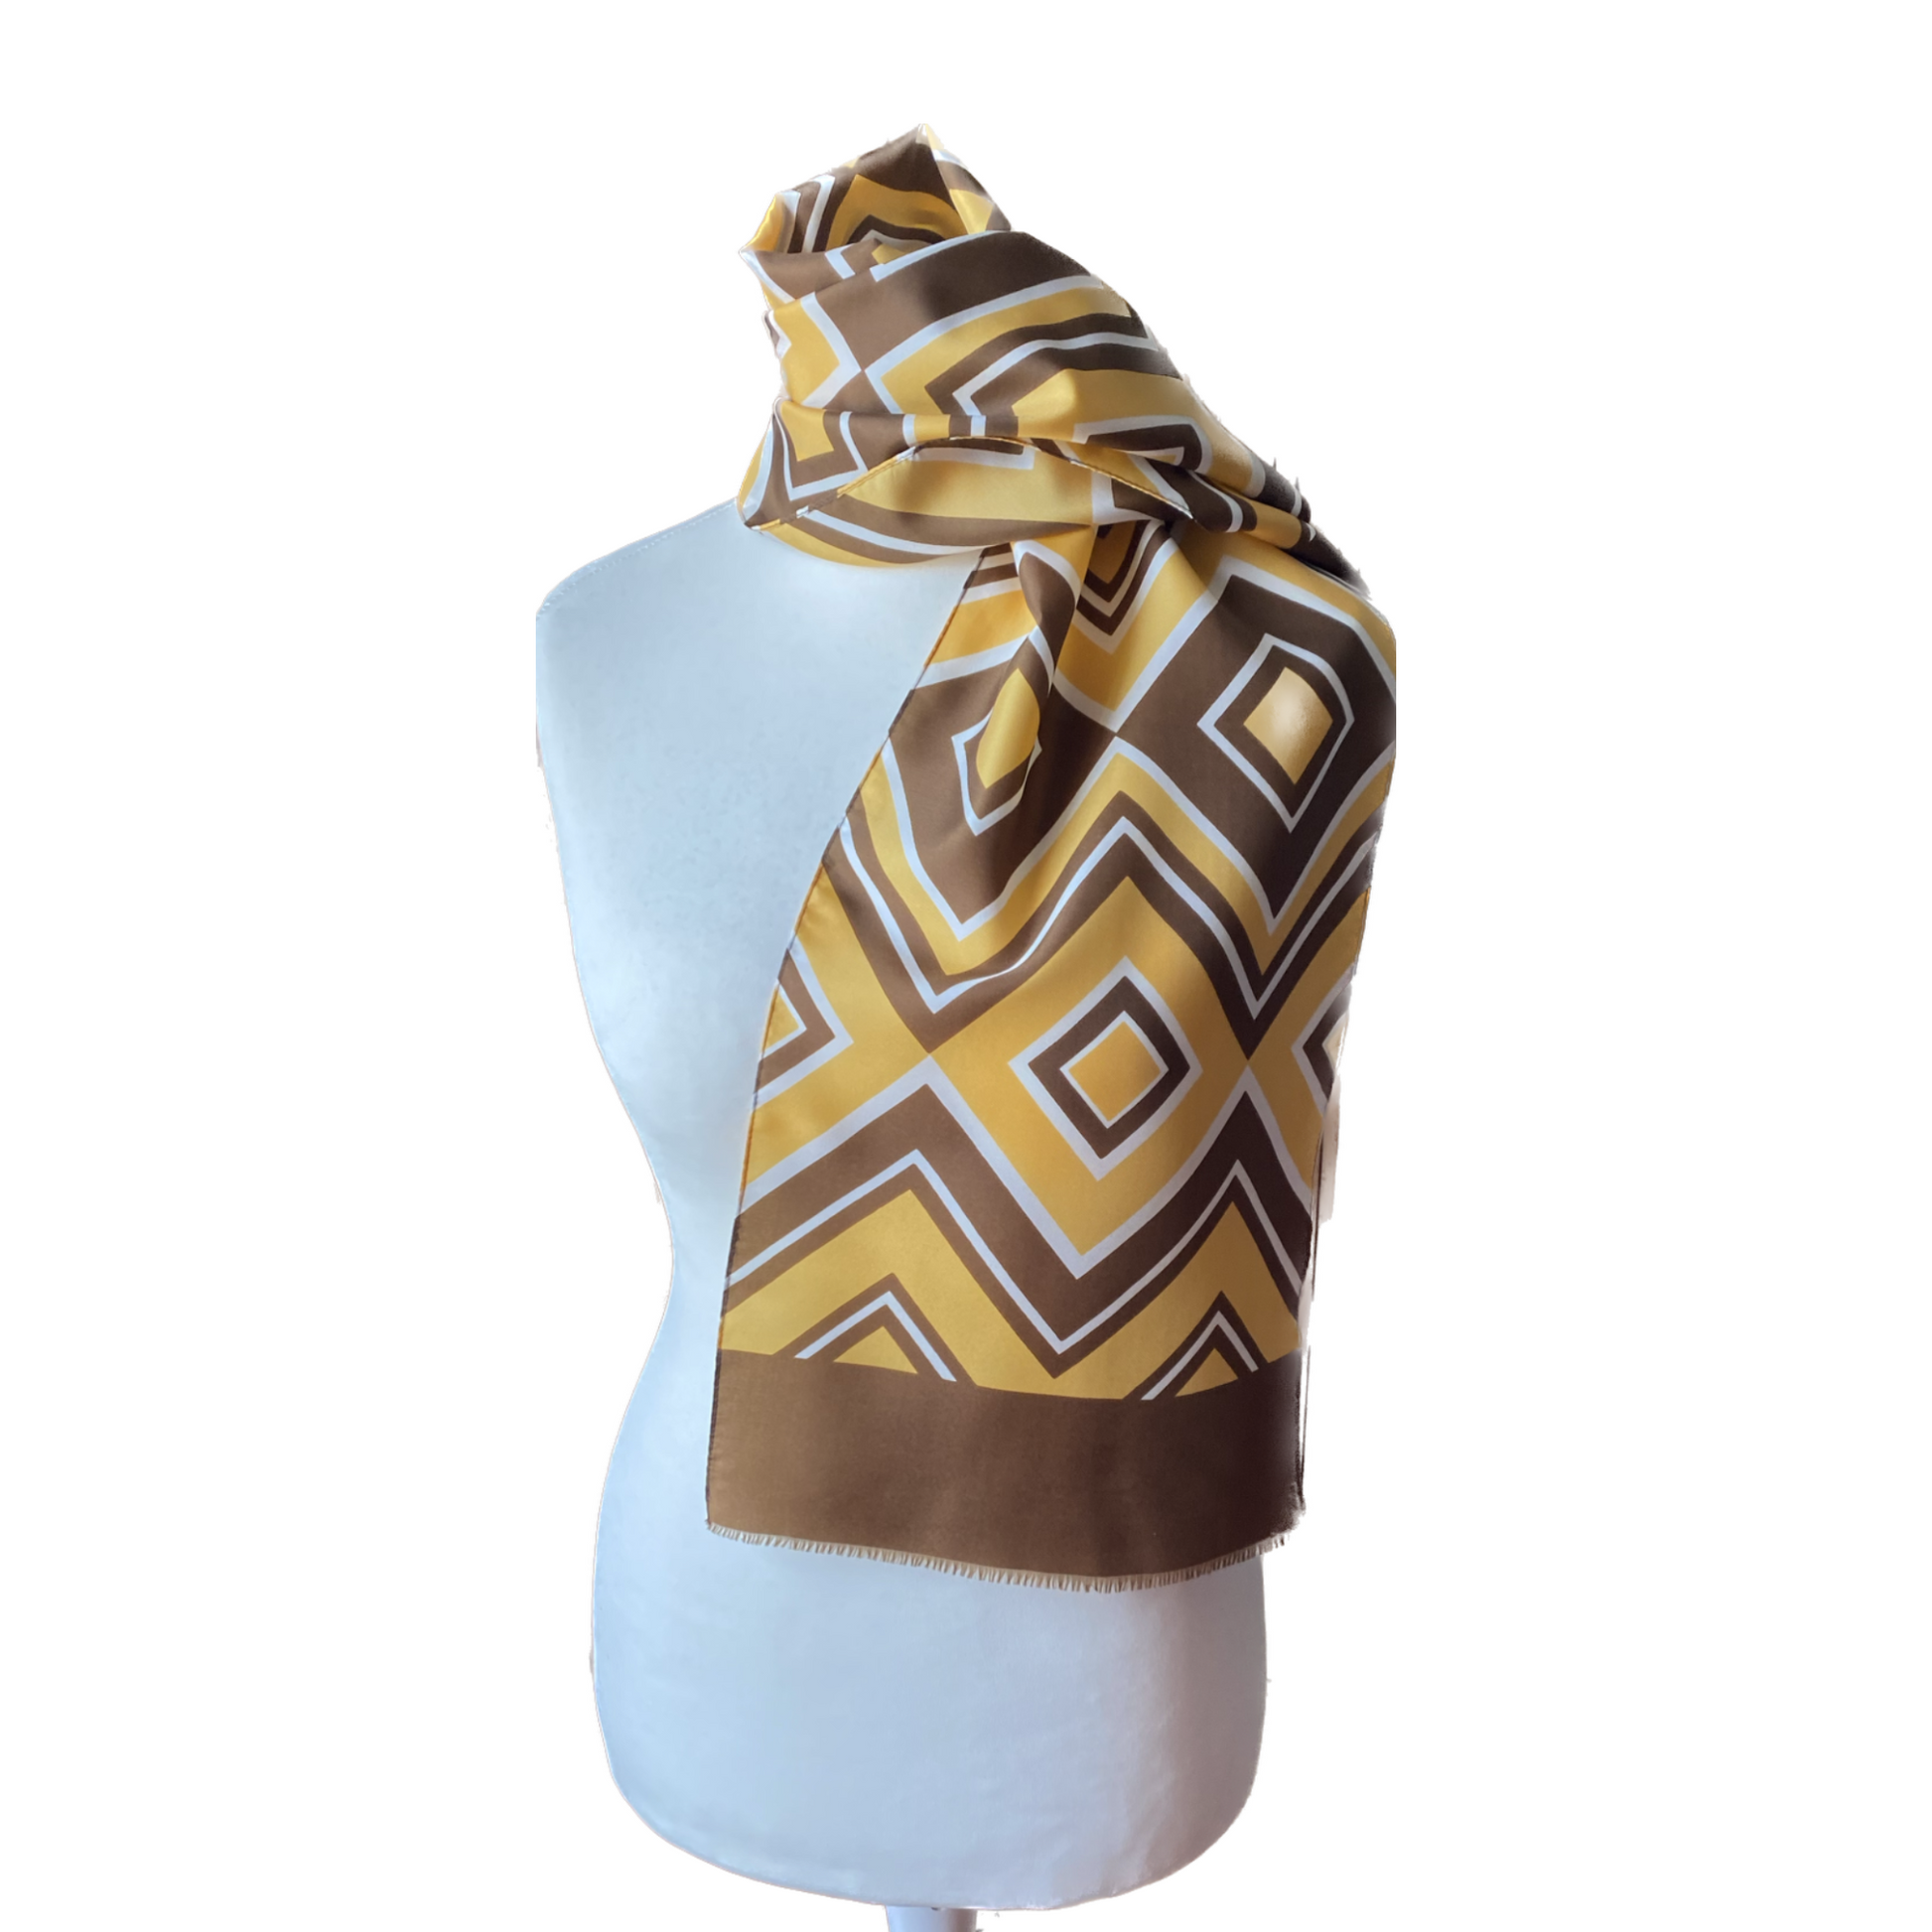 Multi-purpose vintage scarf  - Wear it in multiple ways for different occasions.